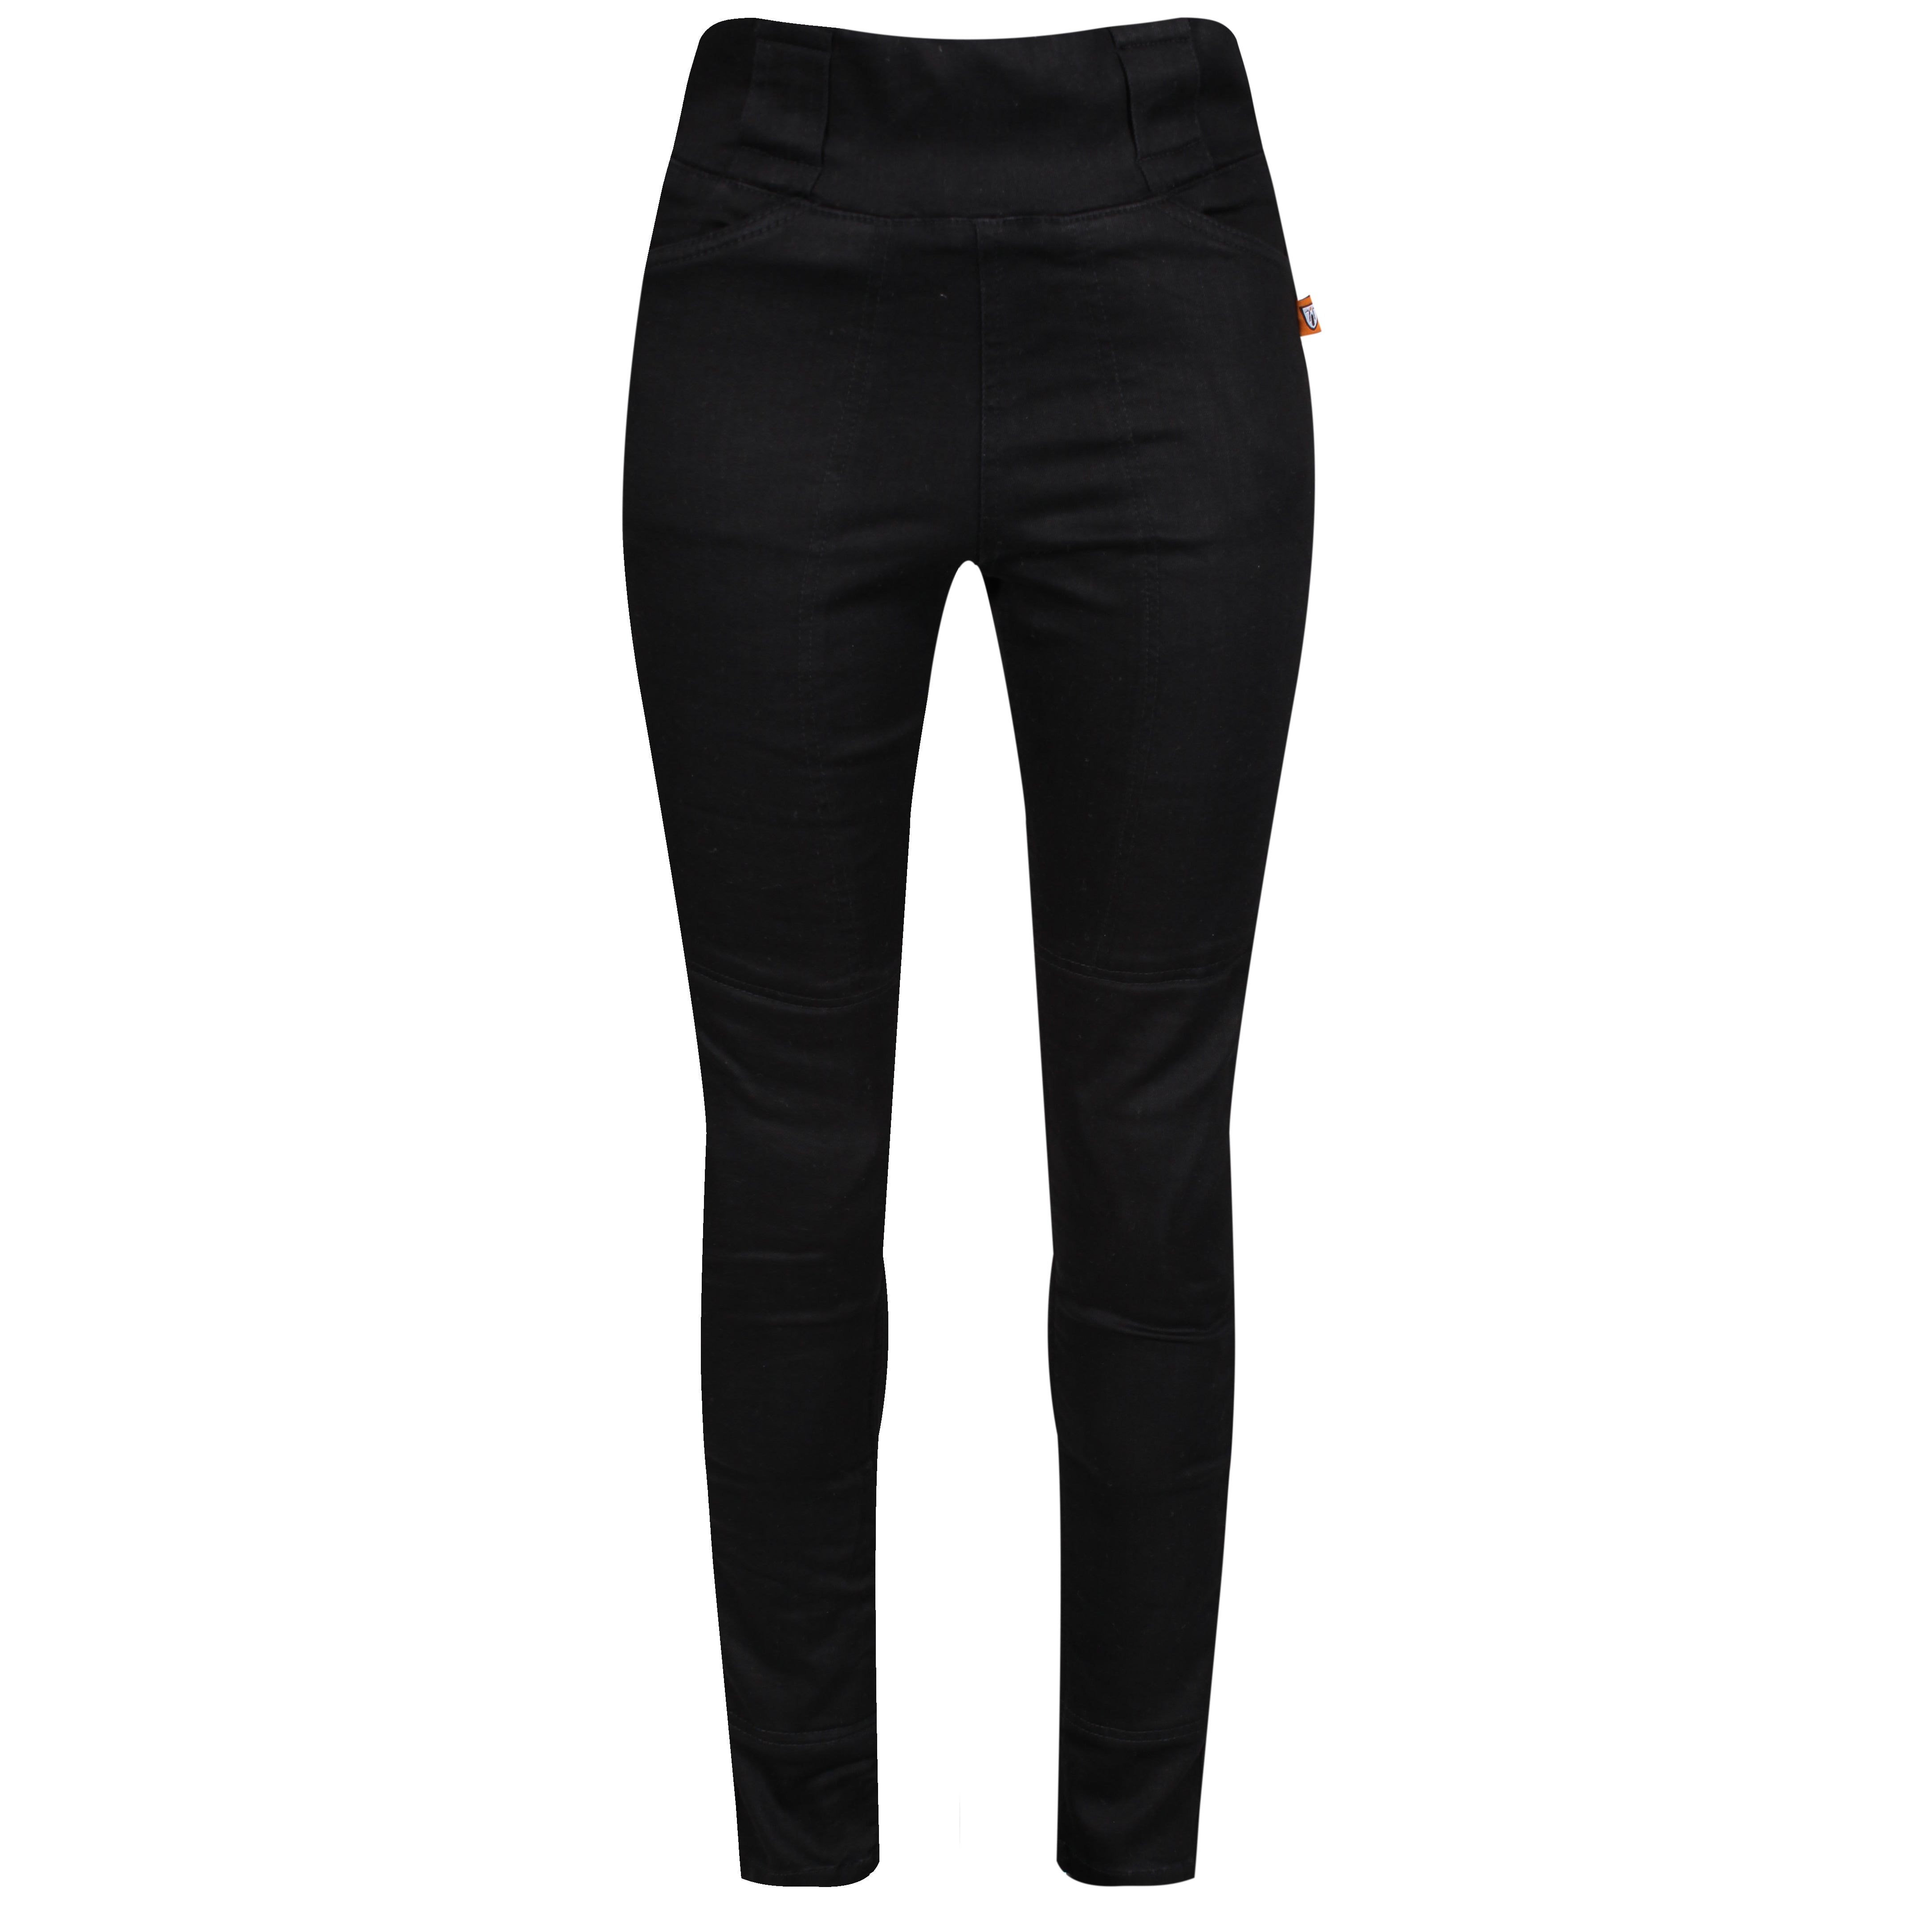 Black women&#39;s motorcycle jeggings from Moto girl with high waste from front